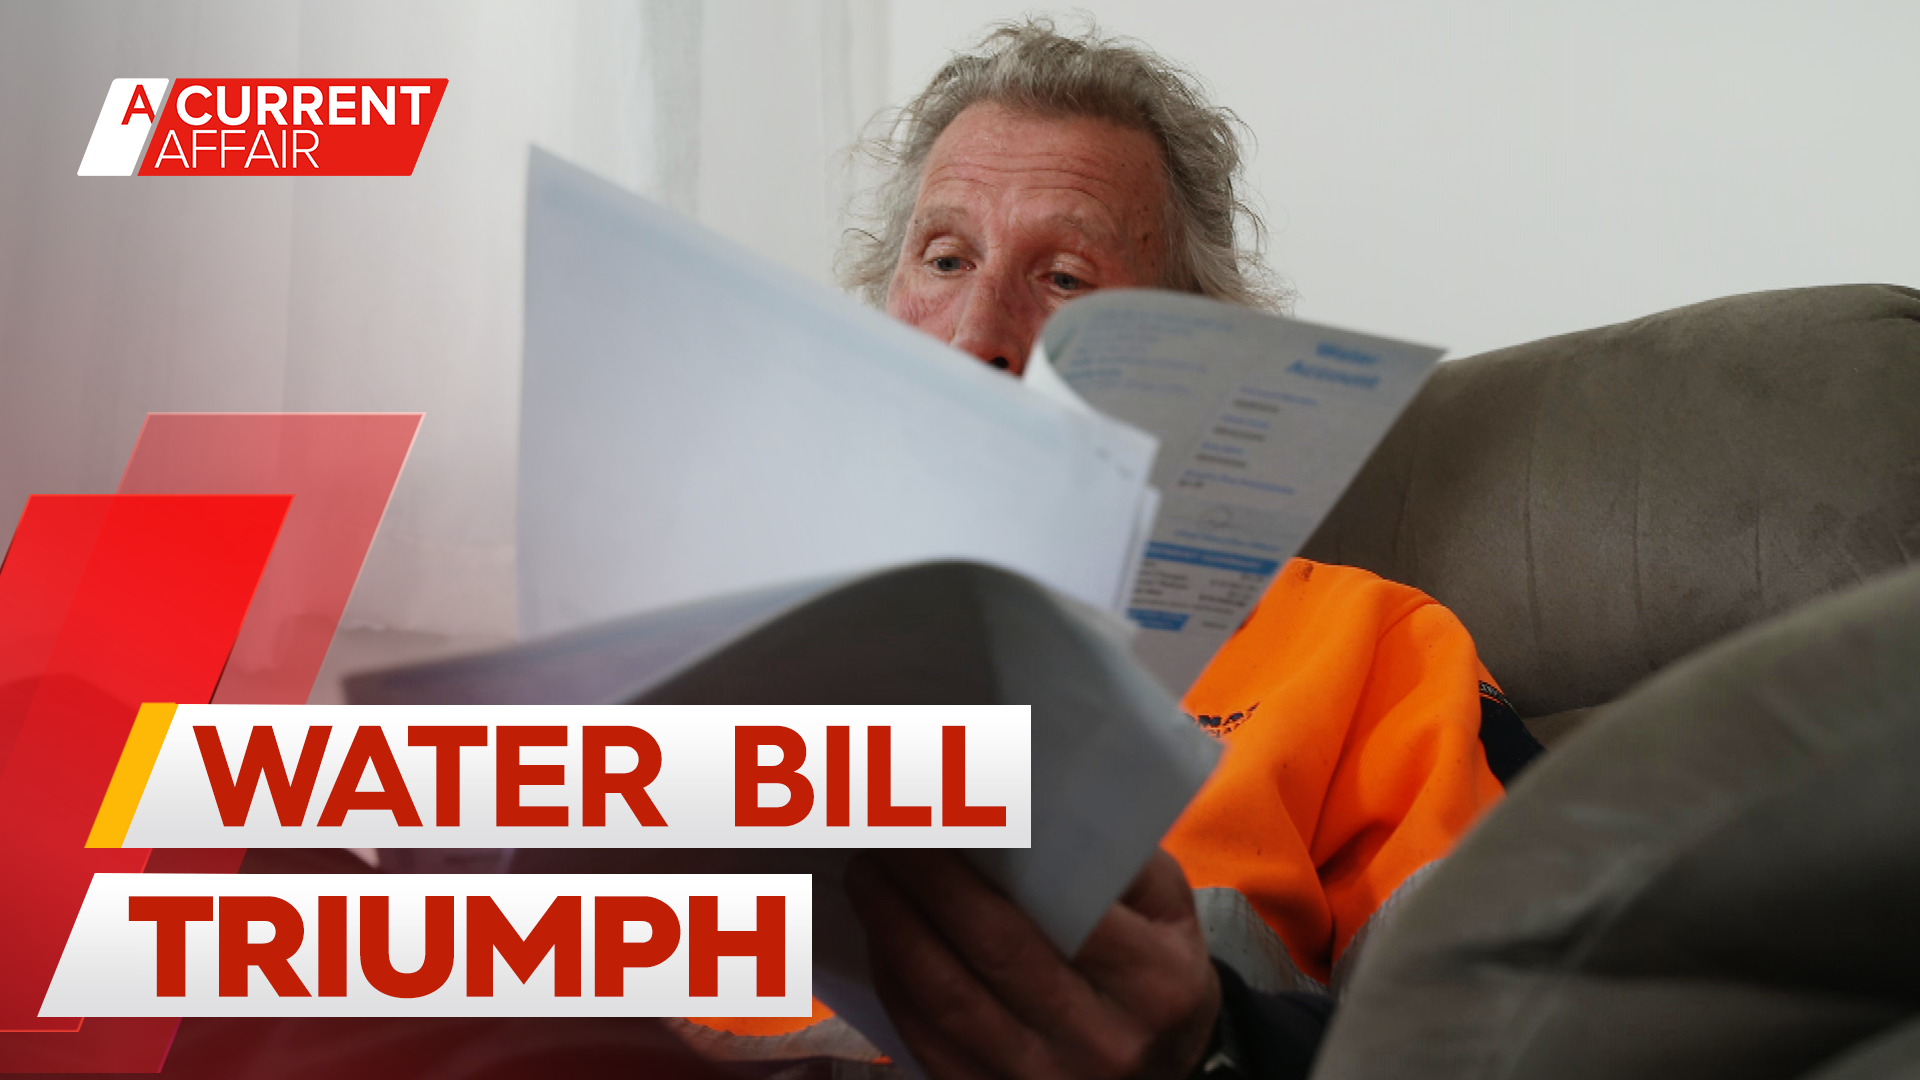 Council backflips after charging one-man household $15,000 for water bill